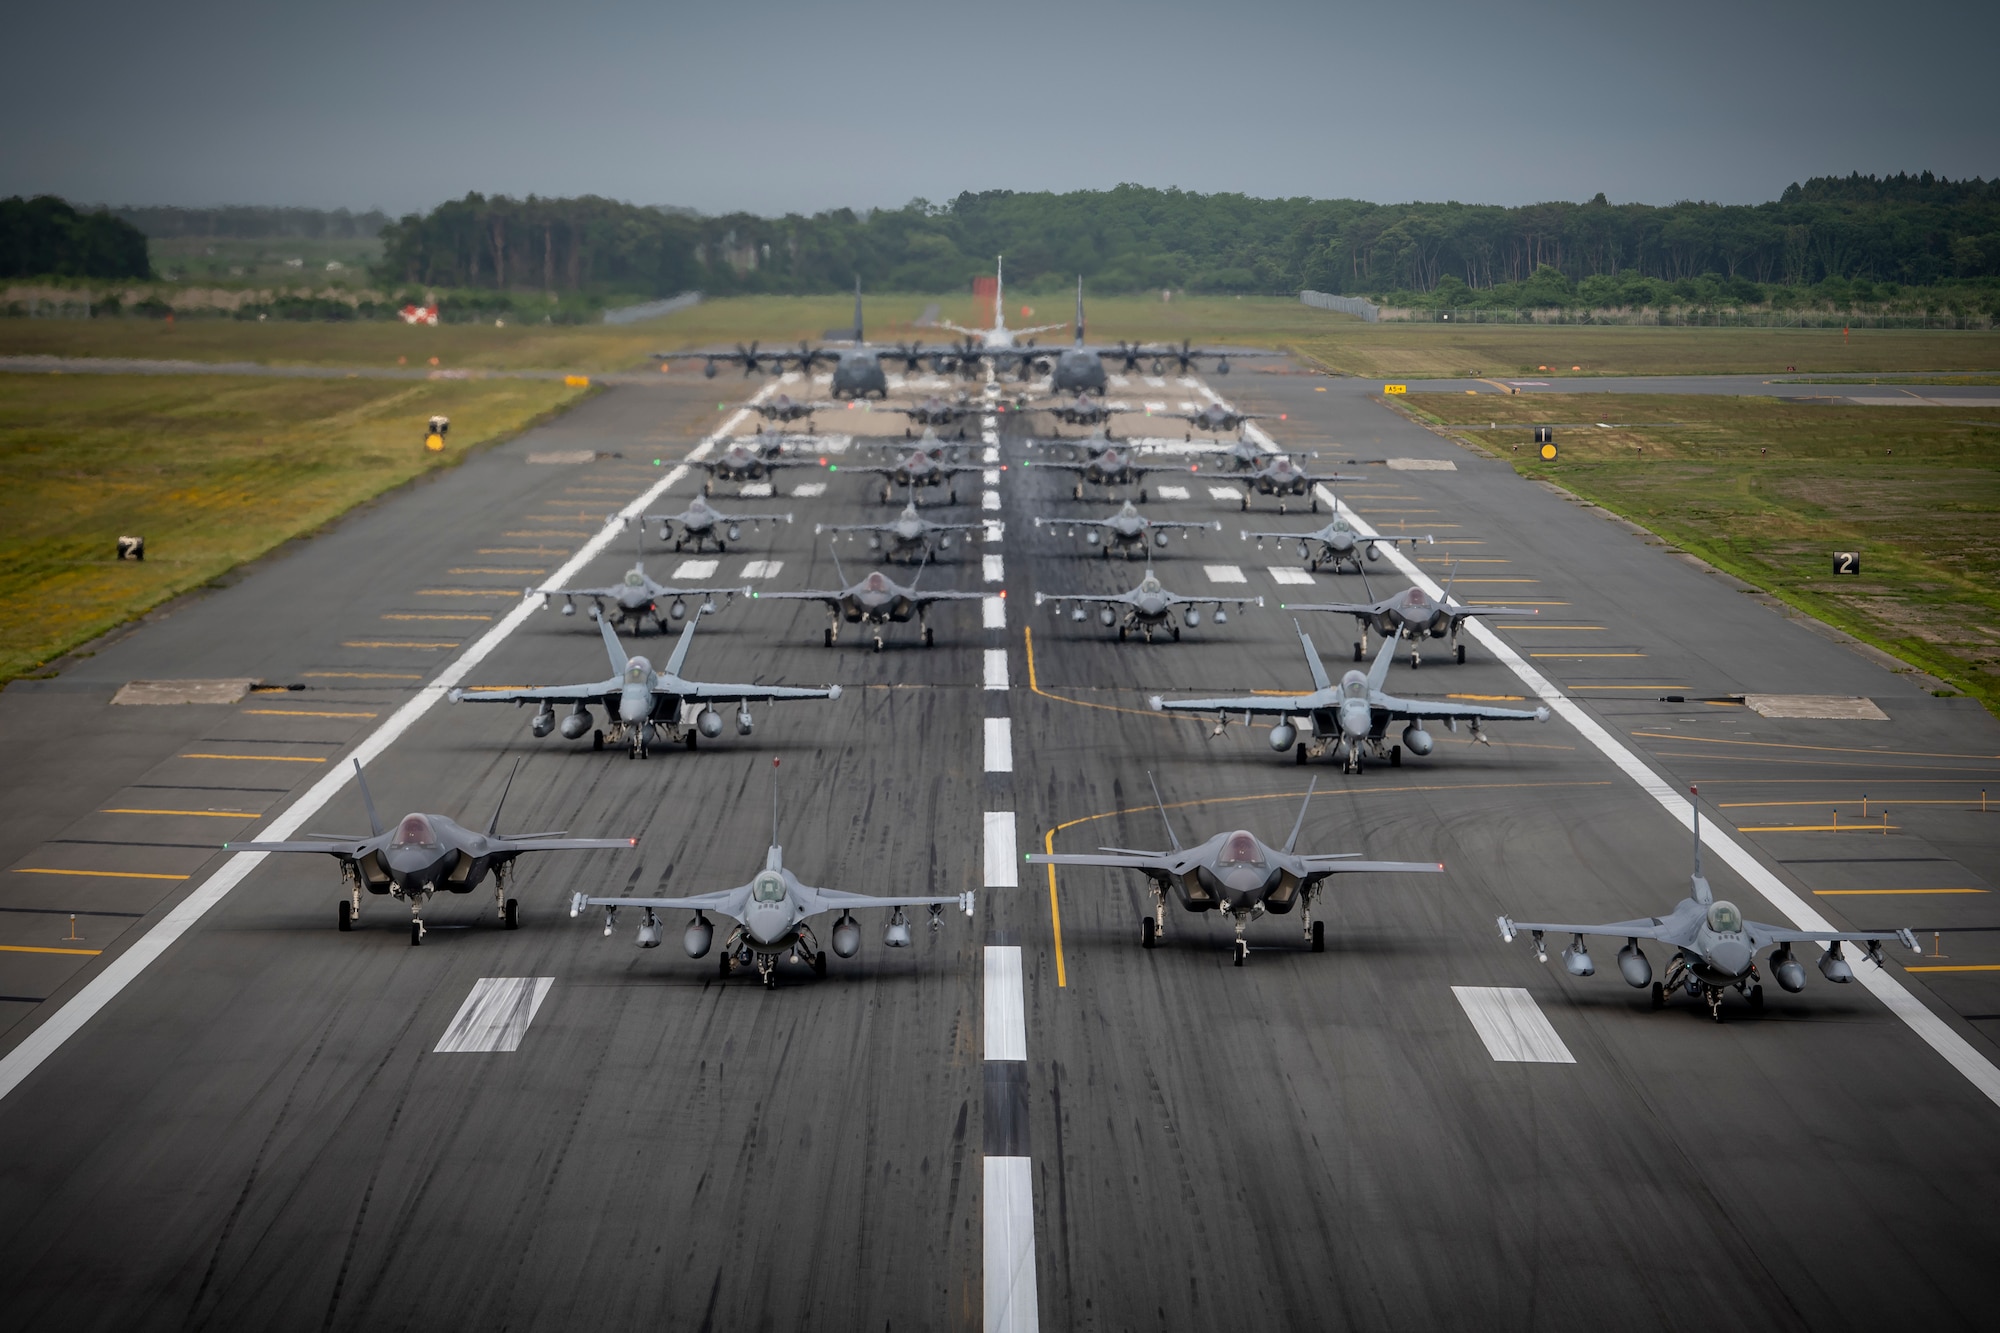 Twelve U.S. Air Force F-16CM Fighting Falcons, 12 Koku-Jieitai F-35A Lightning II Joint Strike Fighters, two U.S. Navy EA-18G Growlers, a USN C-12 Huron, two USAF MC-130J Commando II aircraft, and a USN P-8 Poseidon participate in an “Elephant Walk” at Misawa Air Base, June 22, 2020. The Elephant Walk showcased Misawa Air Base’s collective readiness and ability to generate combat airpower at a moment's notice to ensure regional stability throughout the Indo-Pacific. This was Misawa Air Base’s first time hosting a bilateral and joint Elephant Walk (U.S. Air Force photo by SSgt Melanie Bulow-Gonterman)